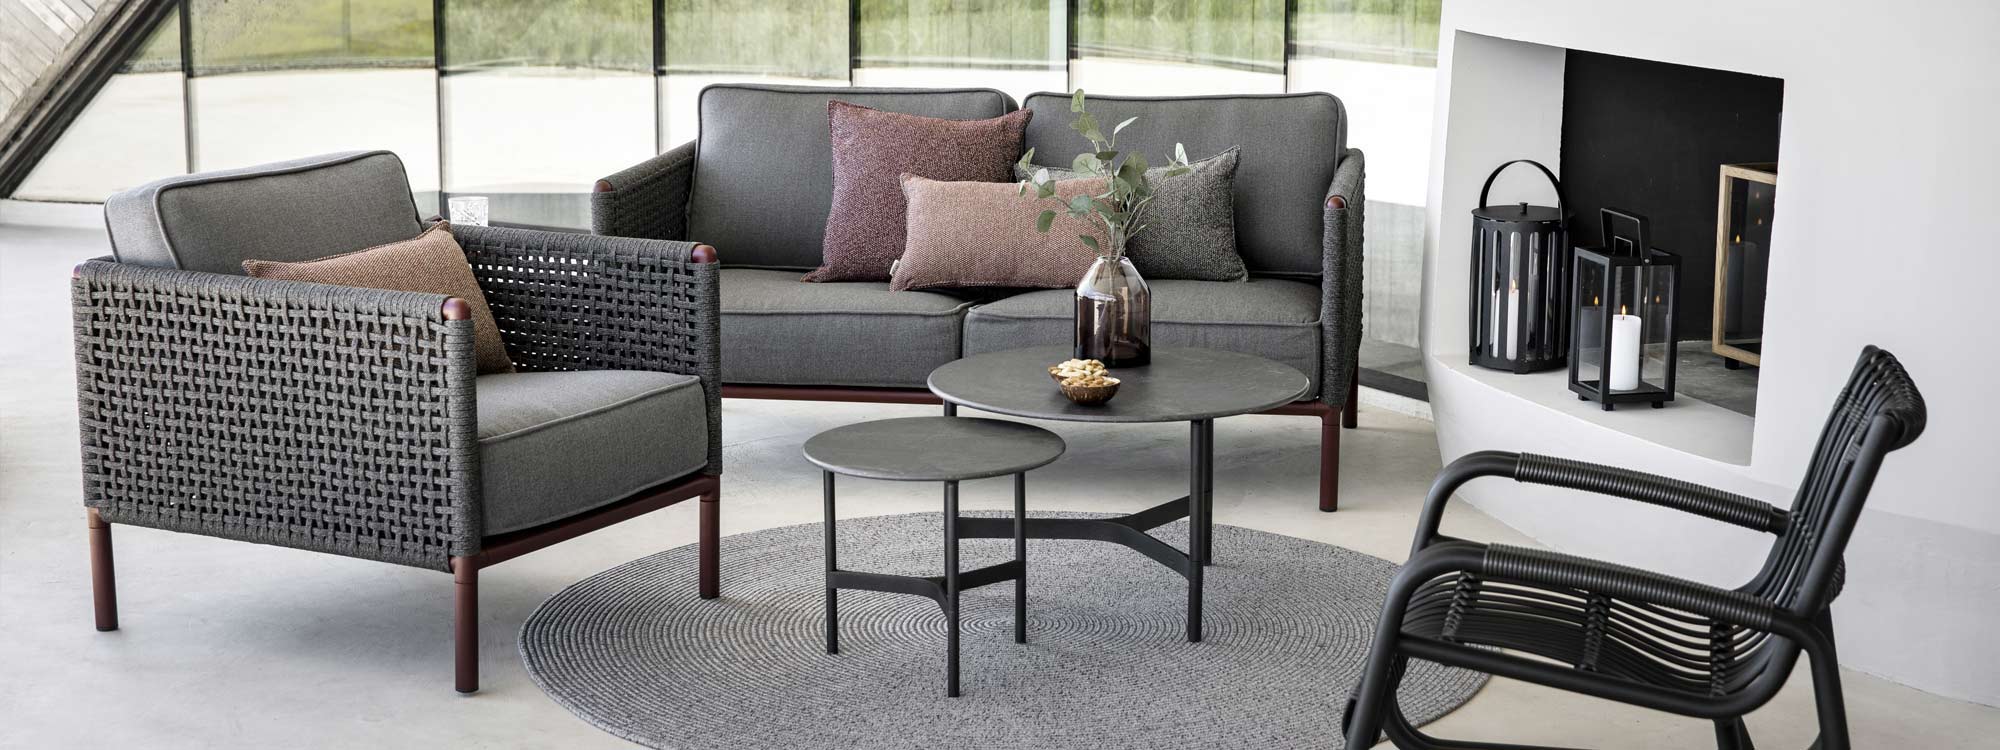 Image of Encore garden sofa and lounge chair with lava-grey Twist coffee tables with black Fossil ceramic tops by Cane-line